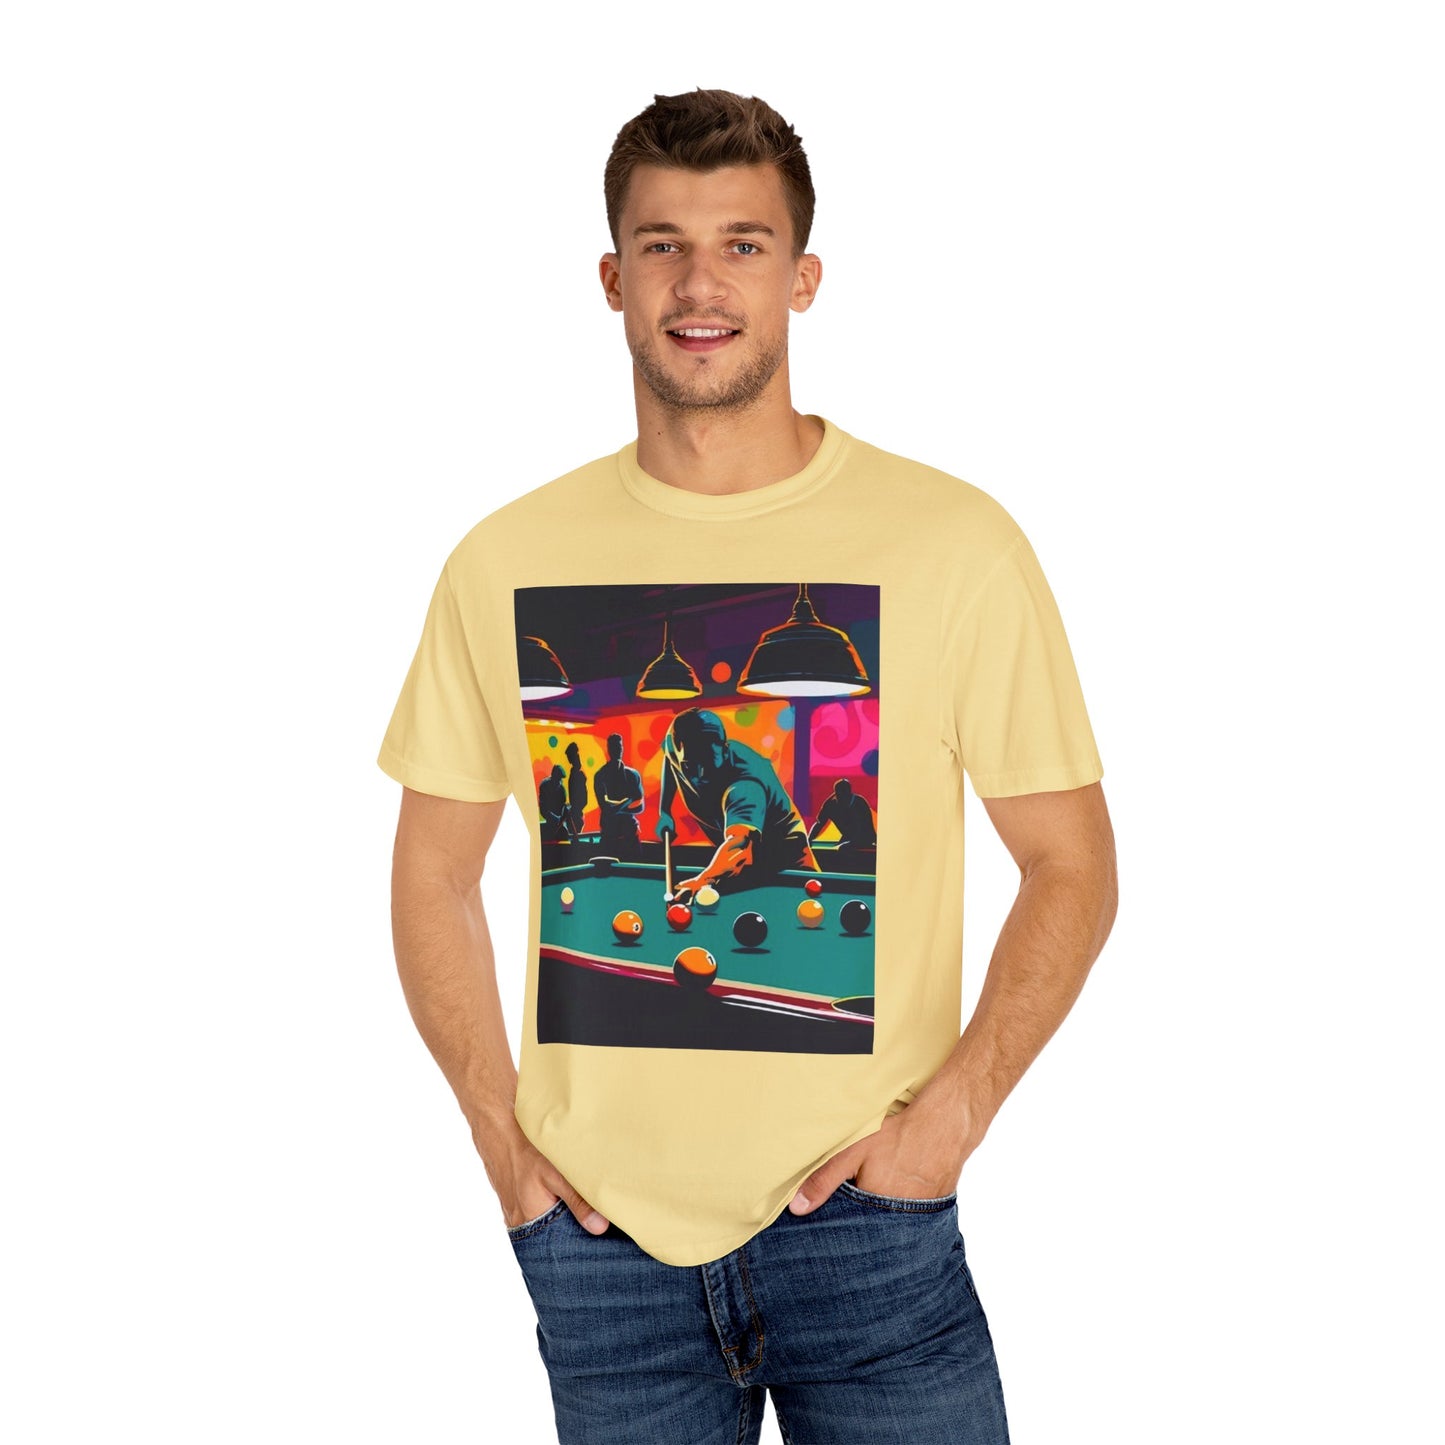 From Break to Victory Lap – Mastering the Table! Pool T-Shirt